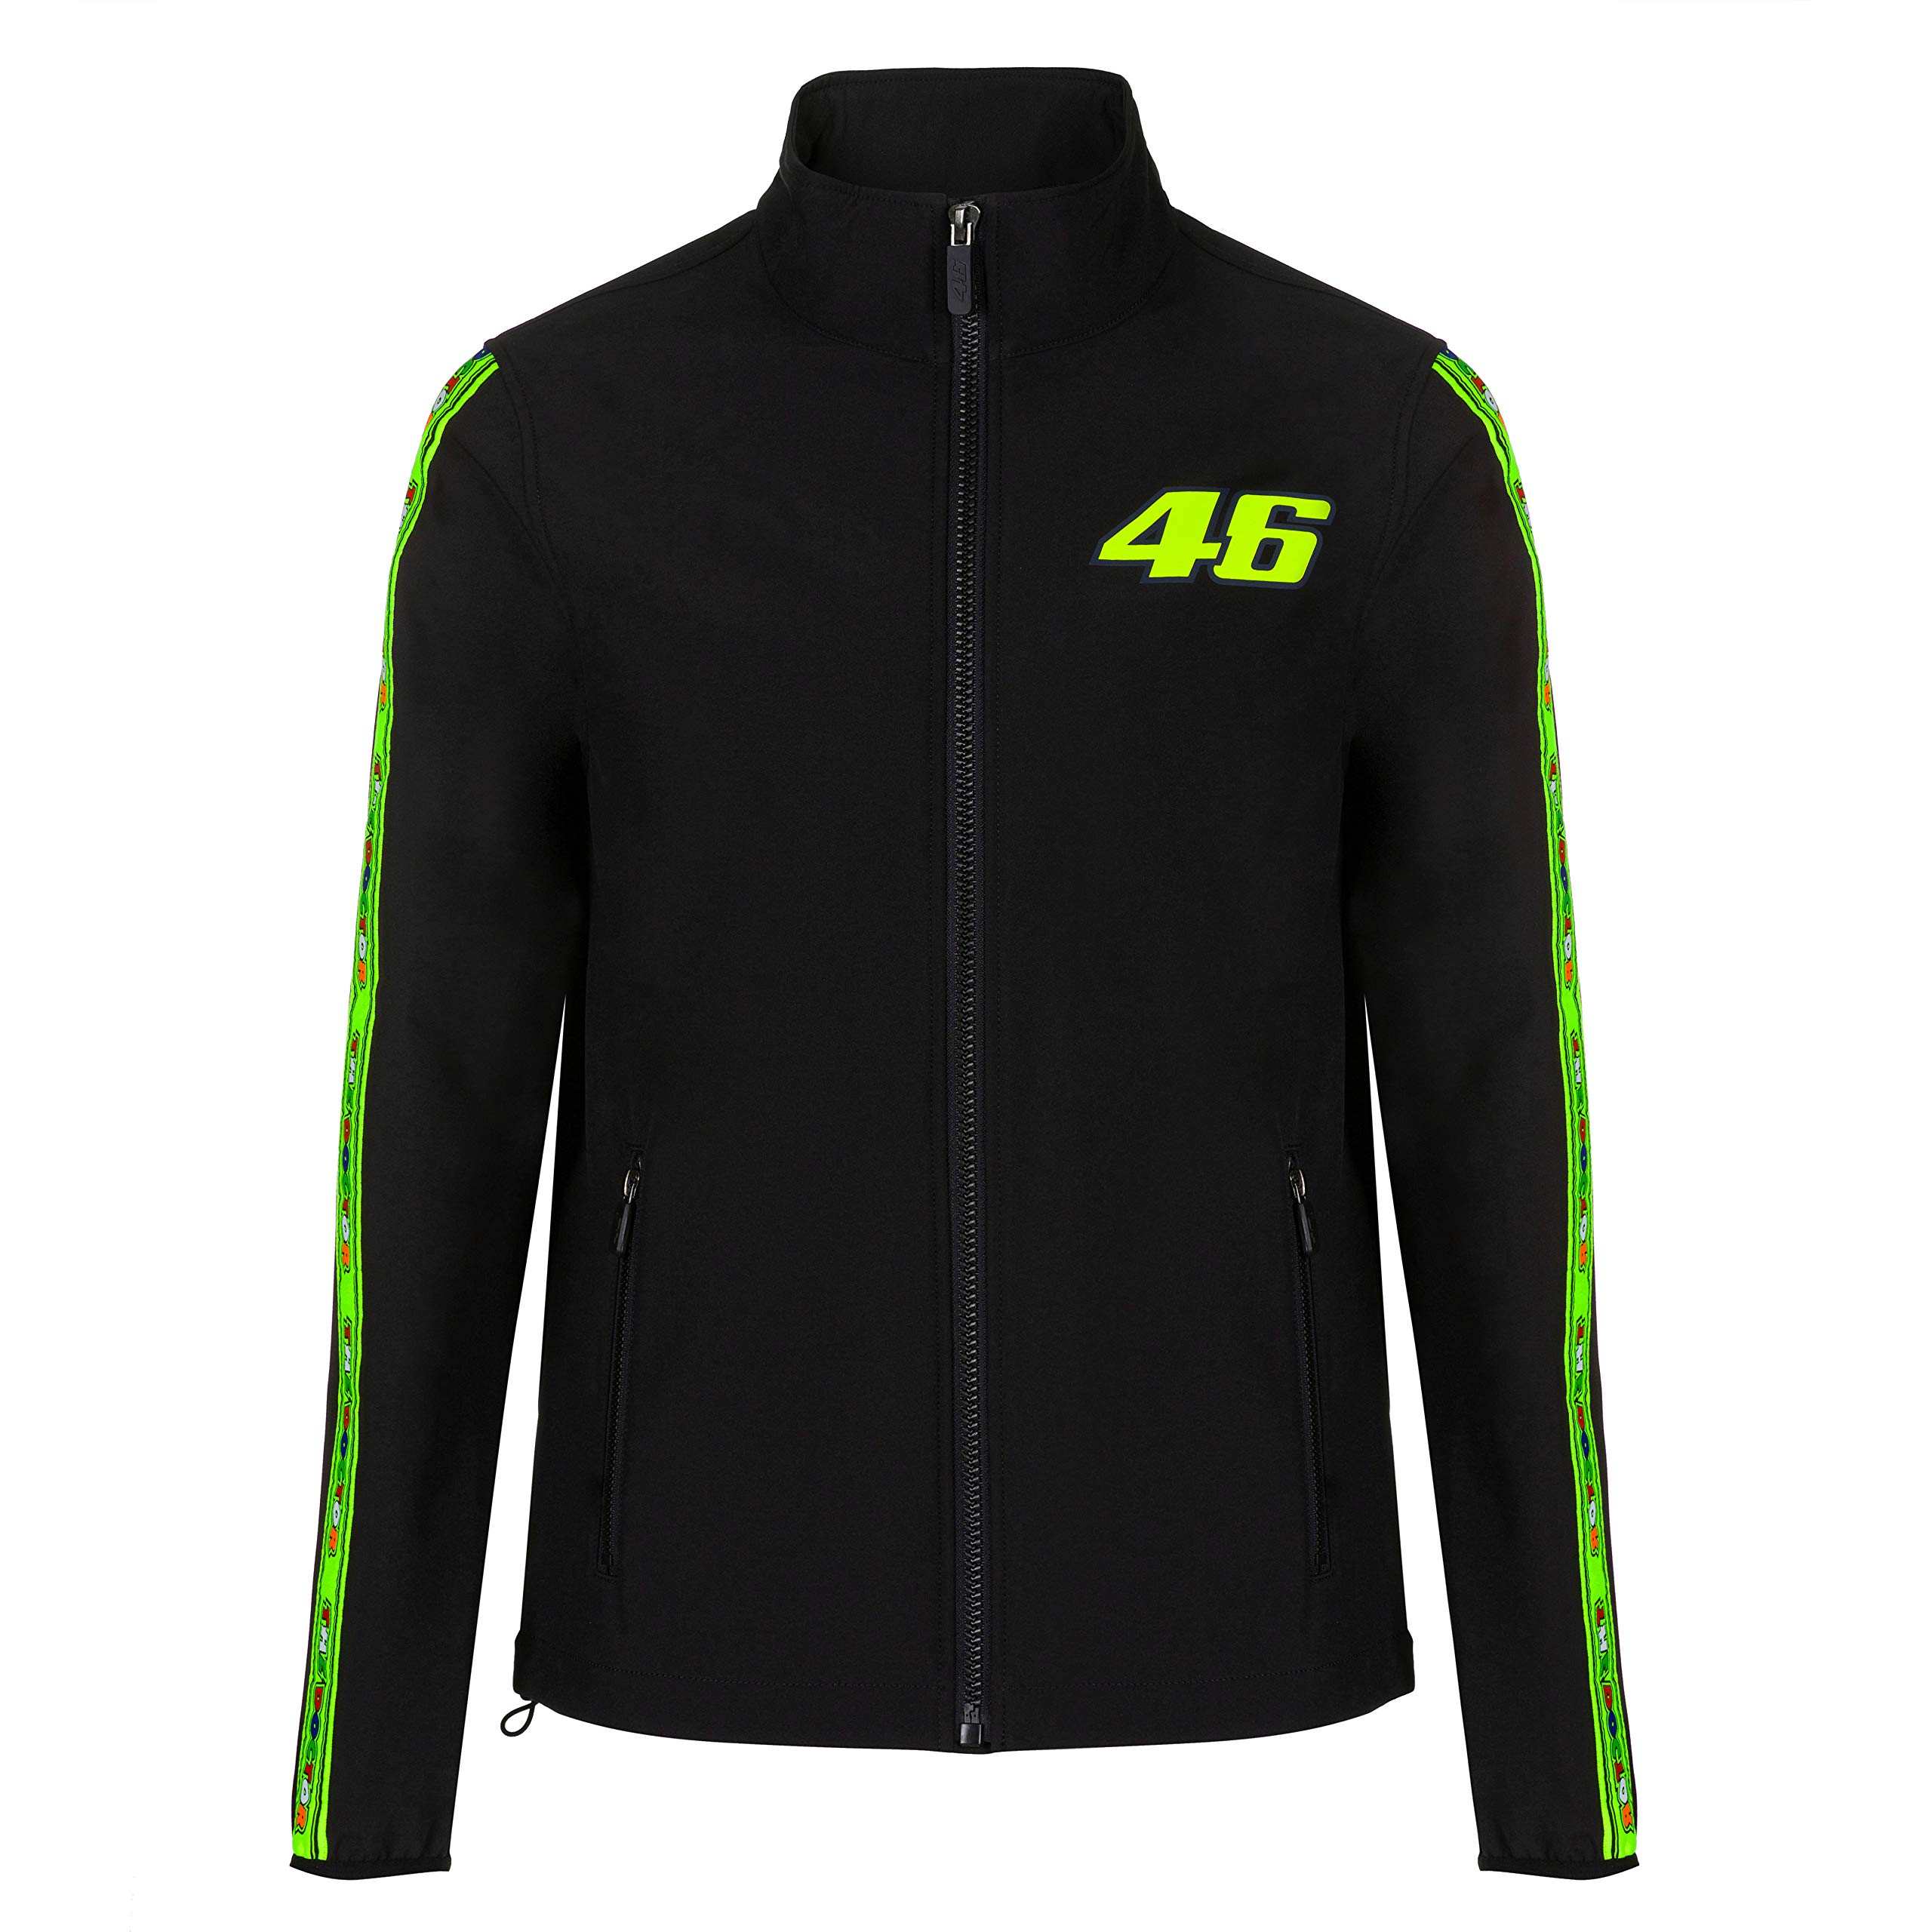 Valentino Rossi Jacket 46 The Doctor M,Black,Man